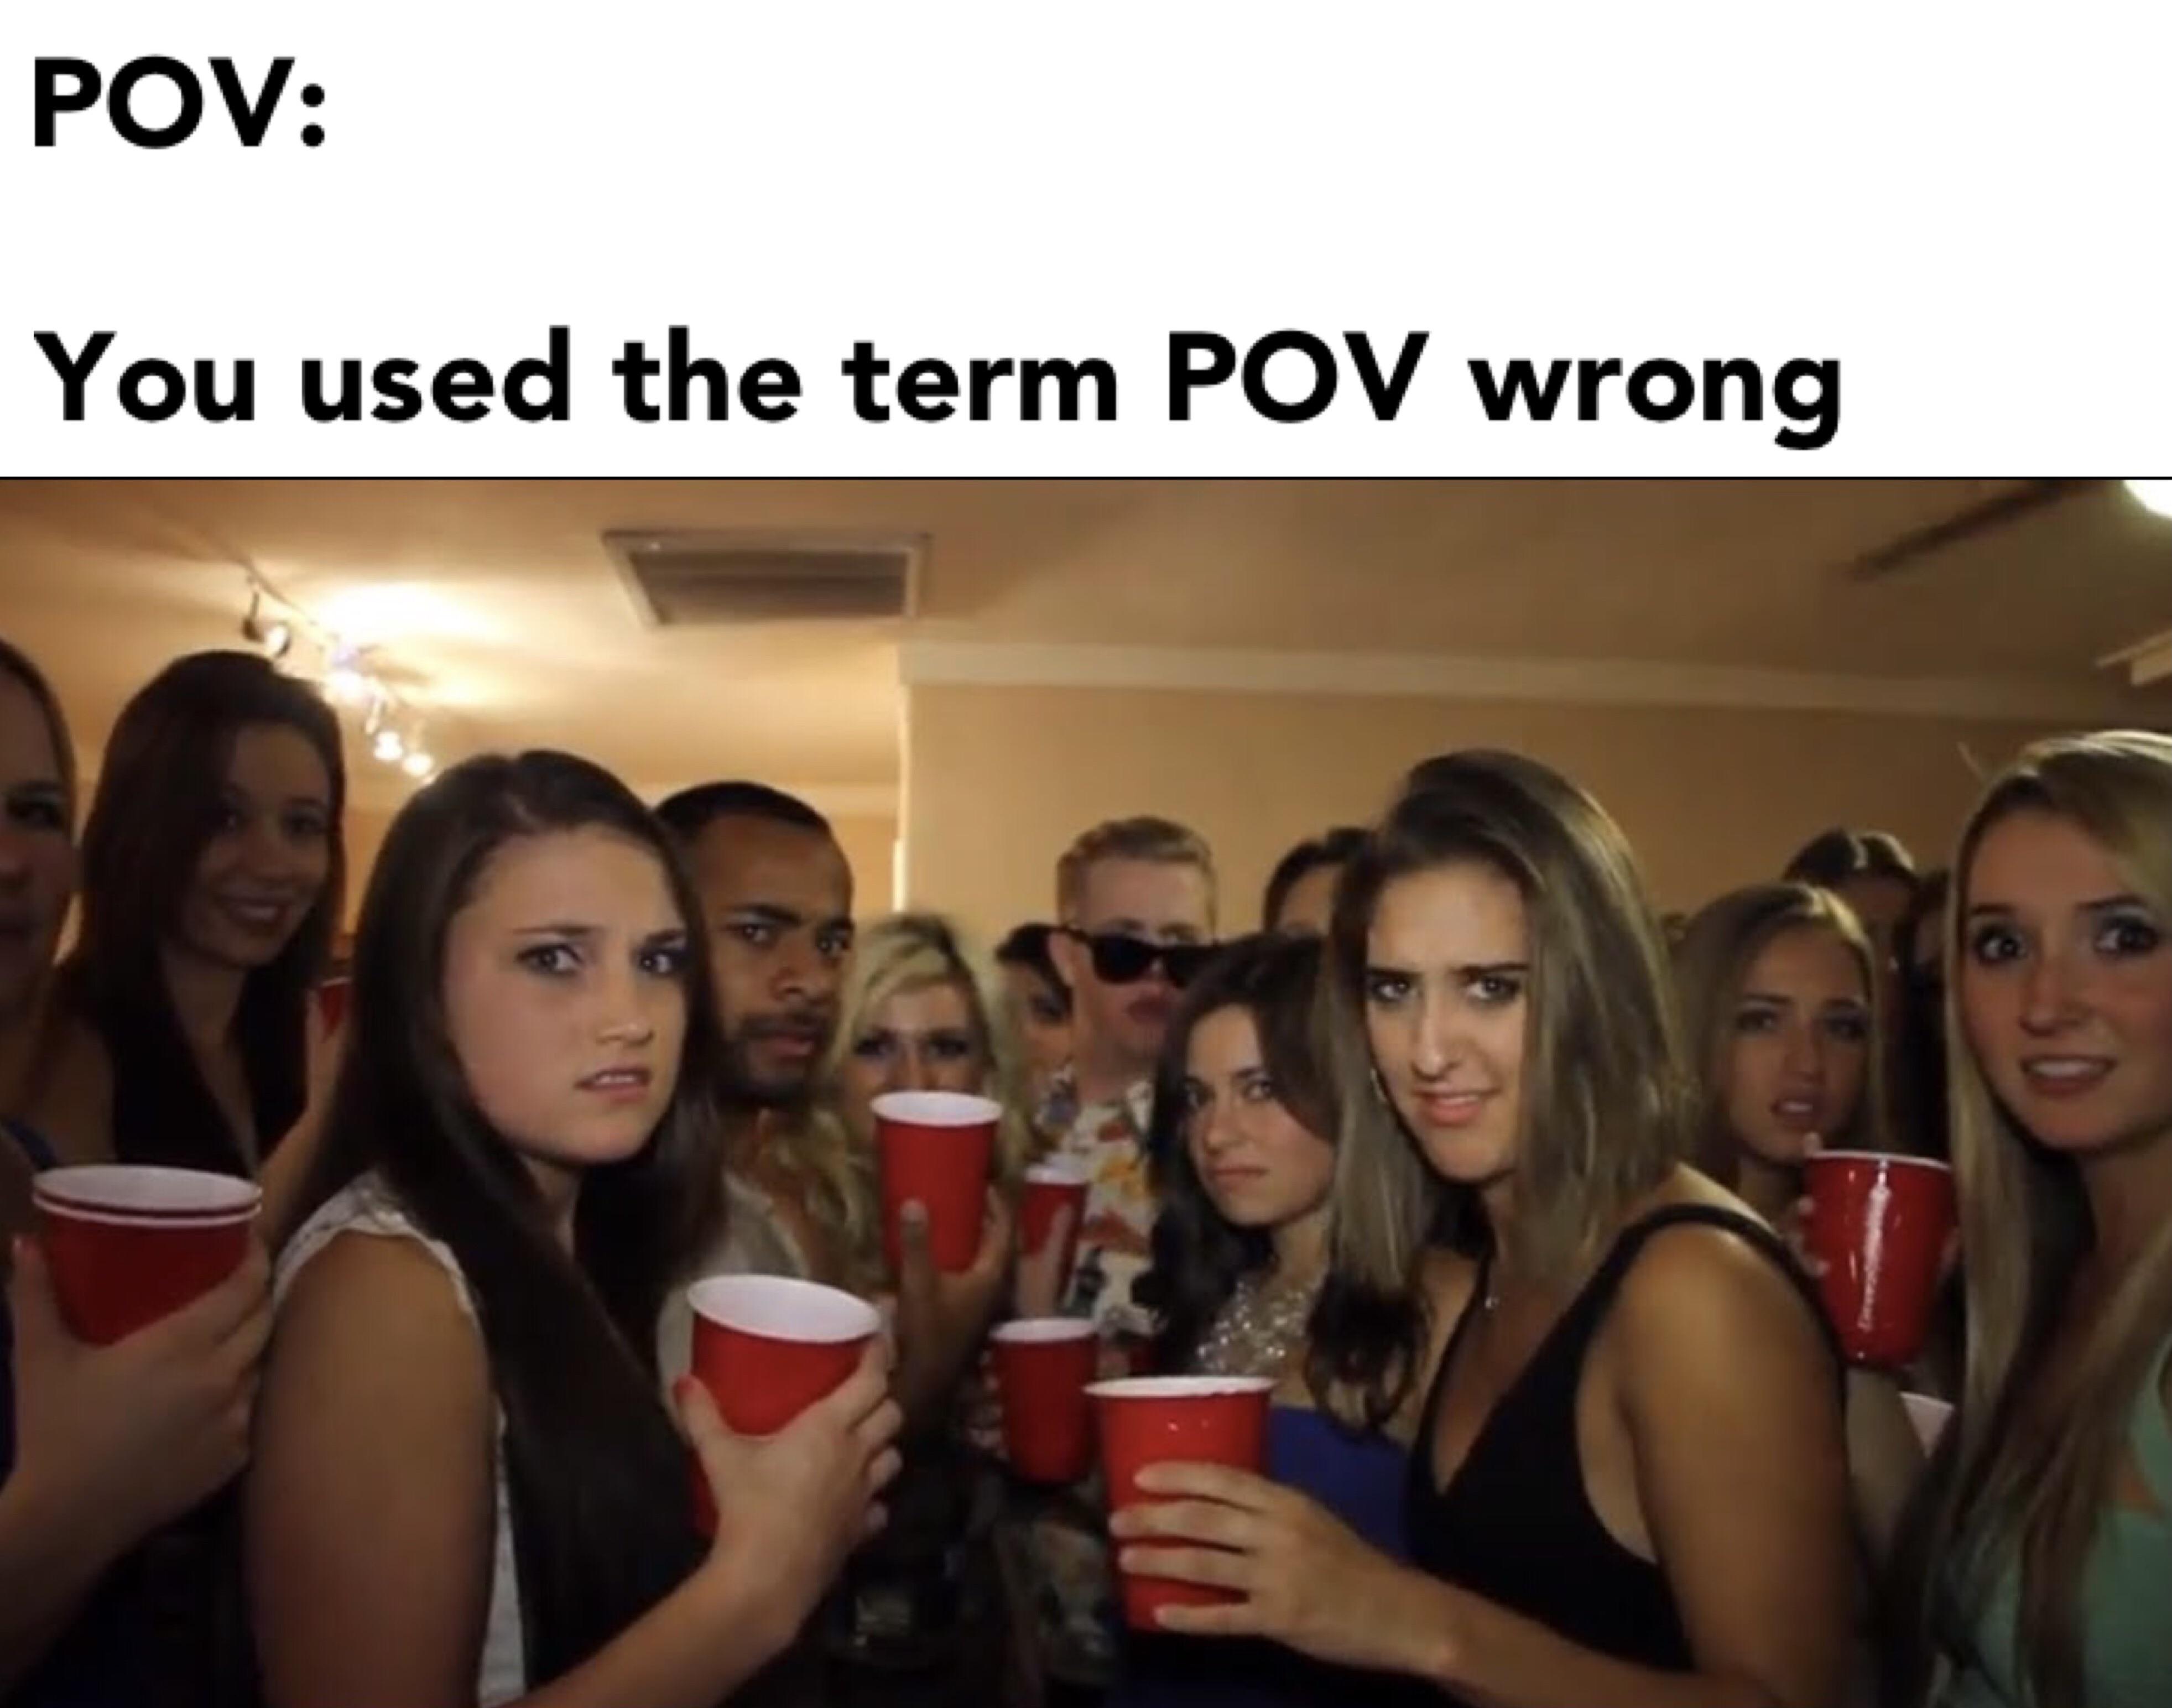 girls at party meme - Pov You used the term Pov wrong